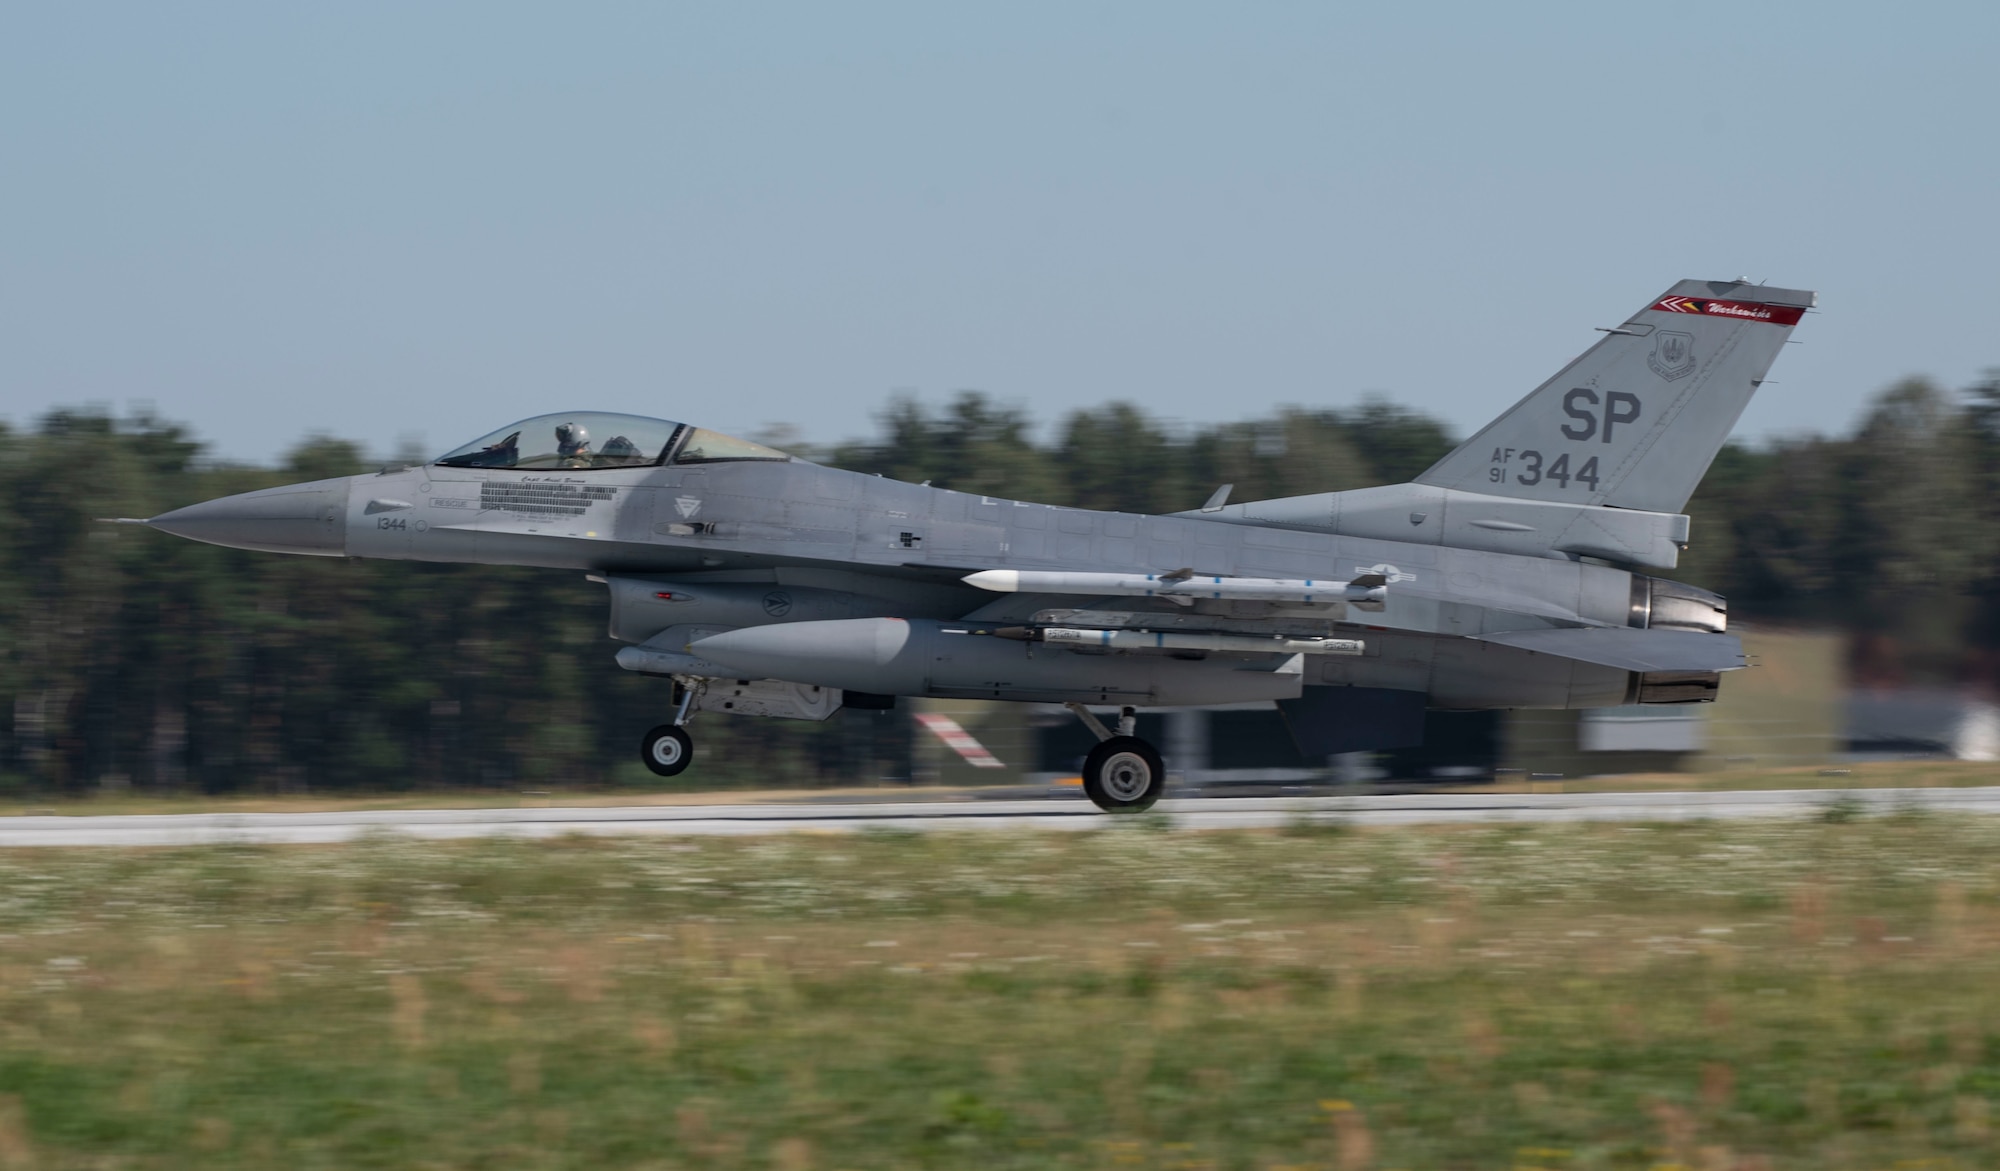 An Air Force F-16 Fighting Falcon, assigned to the 480th Expeditionary Fighter Squadron, takes off at Łask Air Base, Poland, August 20, 2020. The 480th FS, 52nd Fighter Wing, was welcomed by the 32nd Tactical Air Base for participation in Aviation Detachment Rotation 20.4, where both U.S. and Polish Allies shared perspectives, strengthened partnerships and maintained deterrence capabilities. (U.S. Air Force photo by Senior Airman Melody W. Howley)